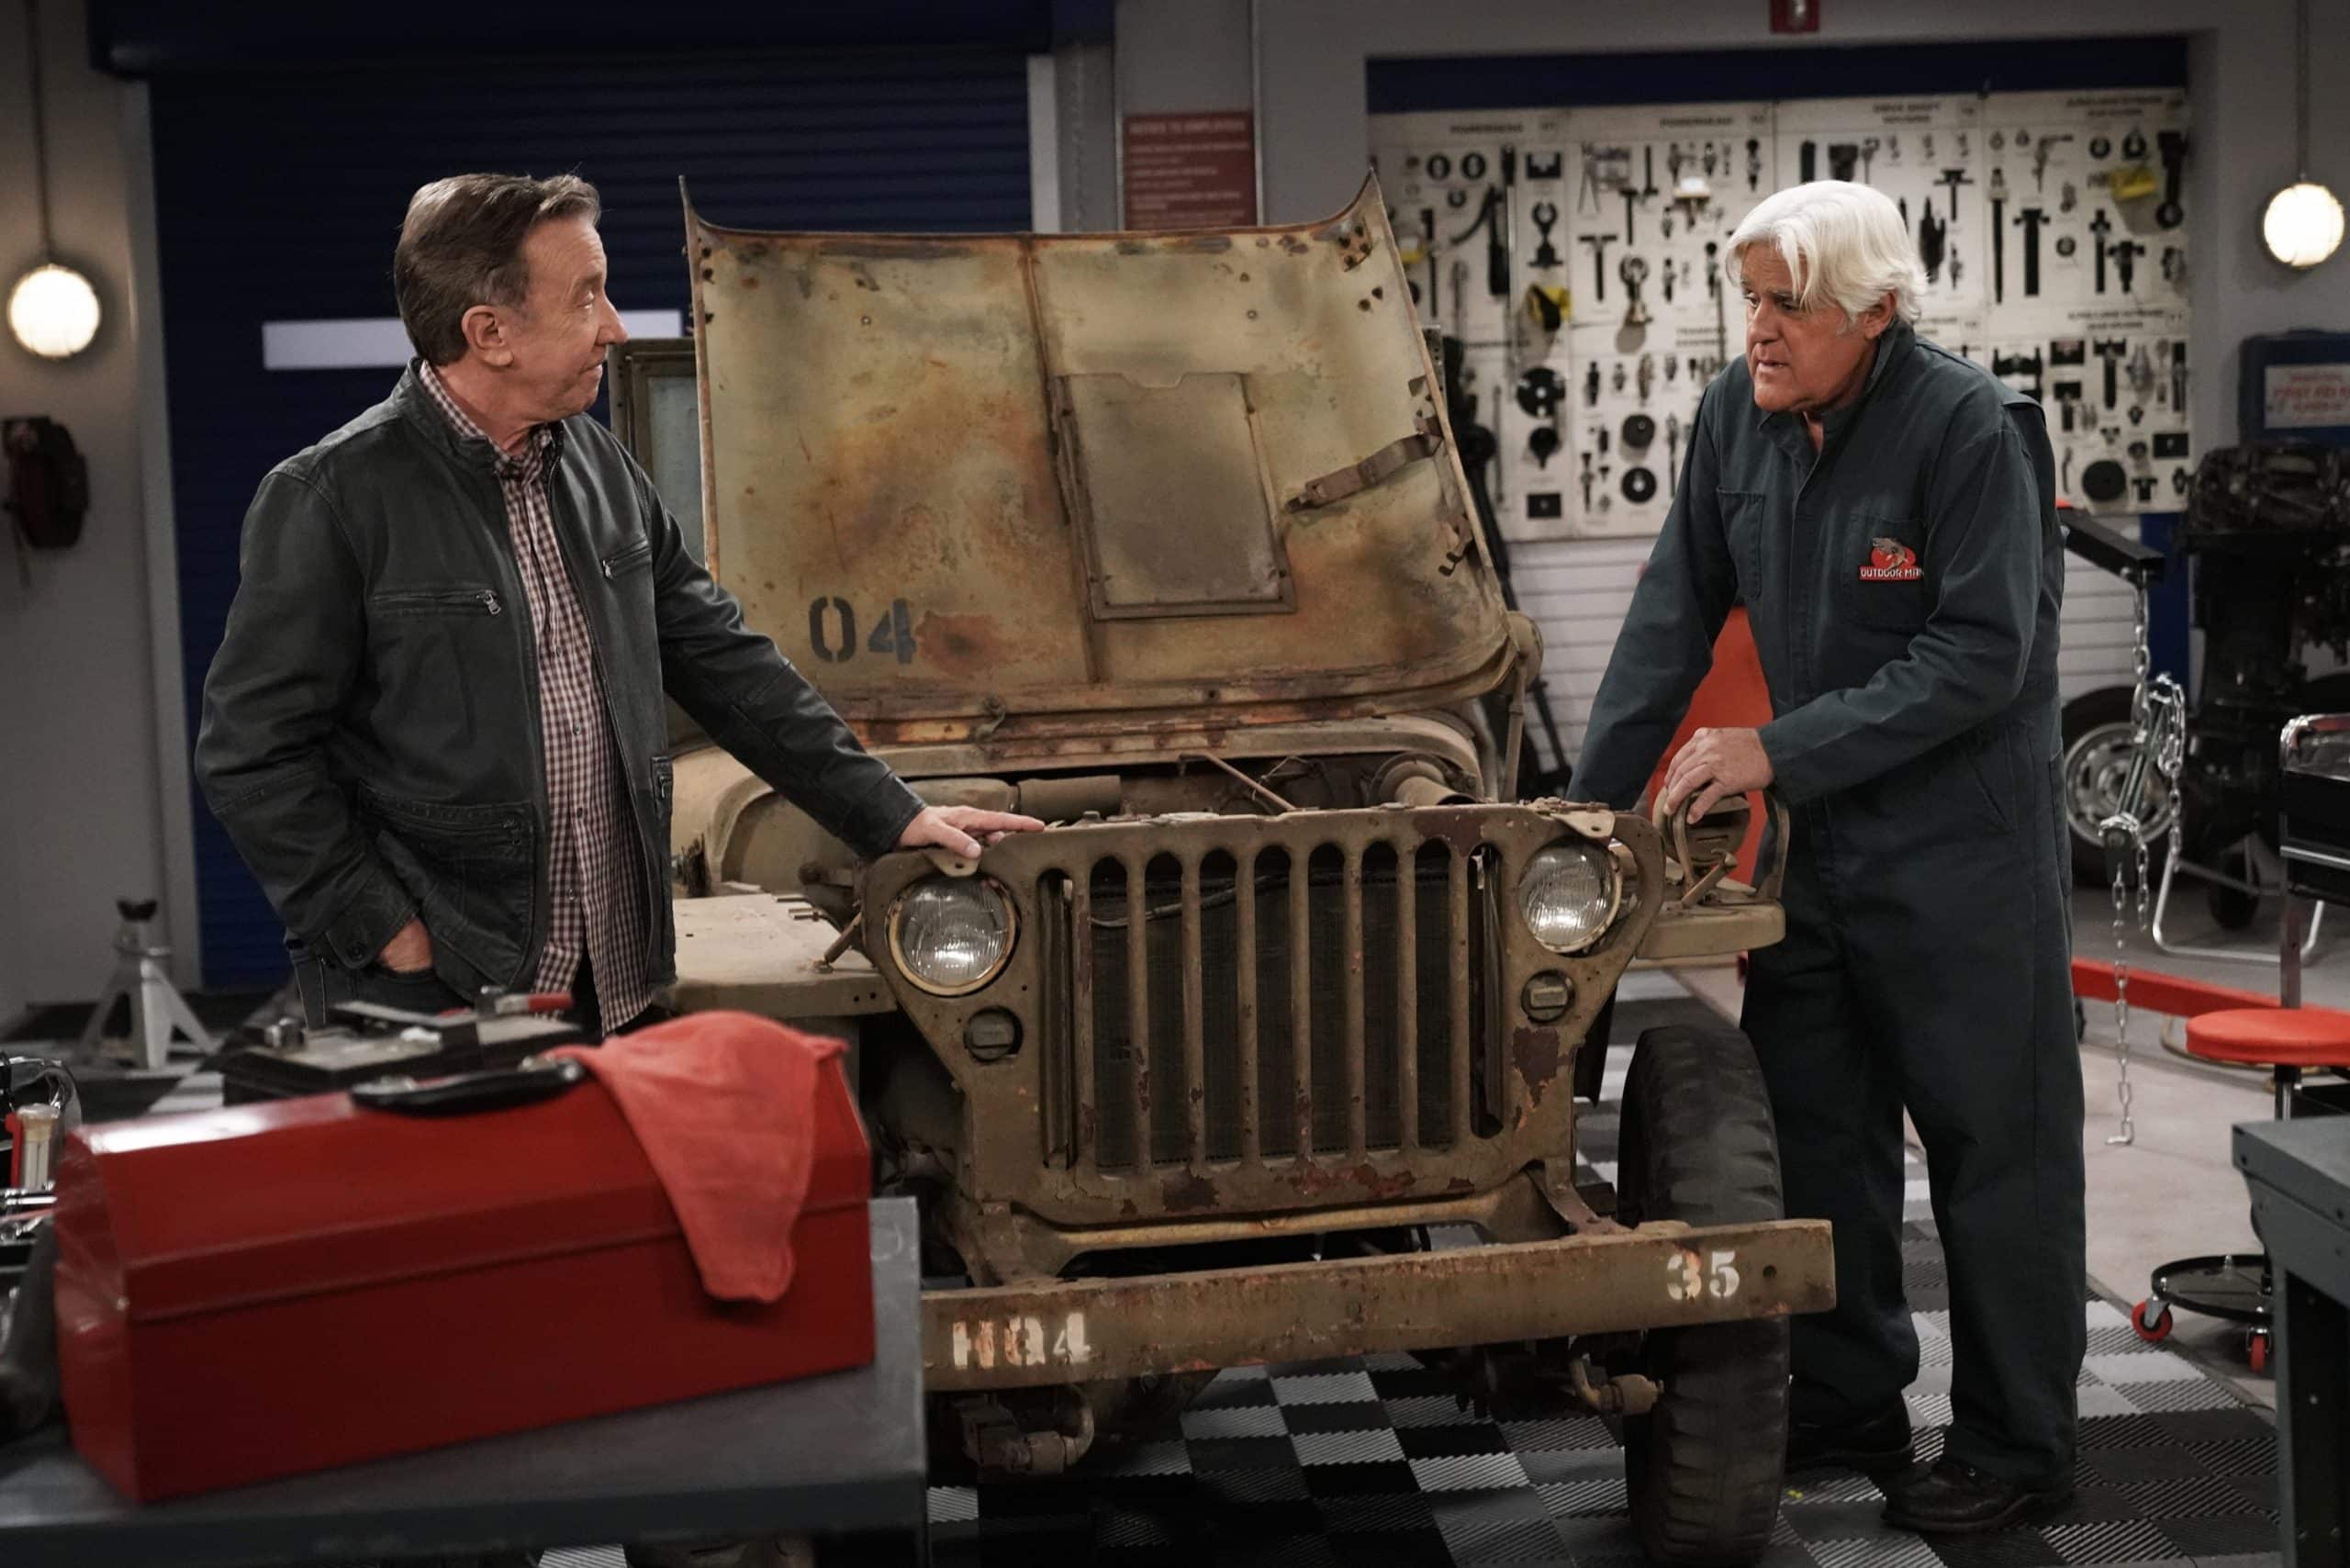 LAST MAN STANDING, from left: Tim Allen, Jay Leno, A Fool and his Money' 